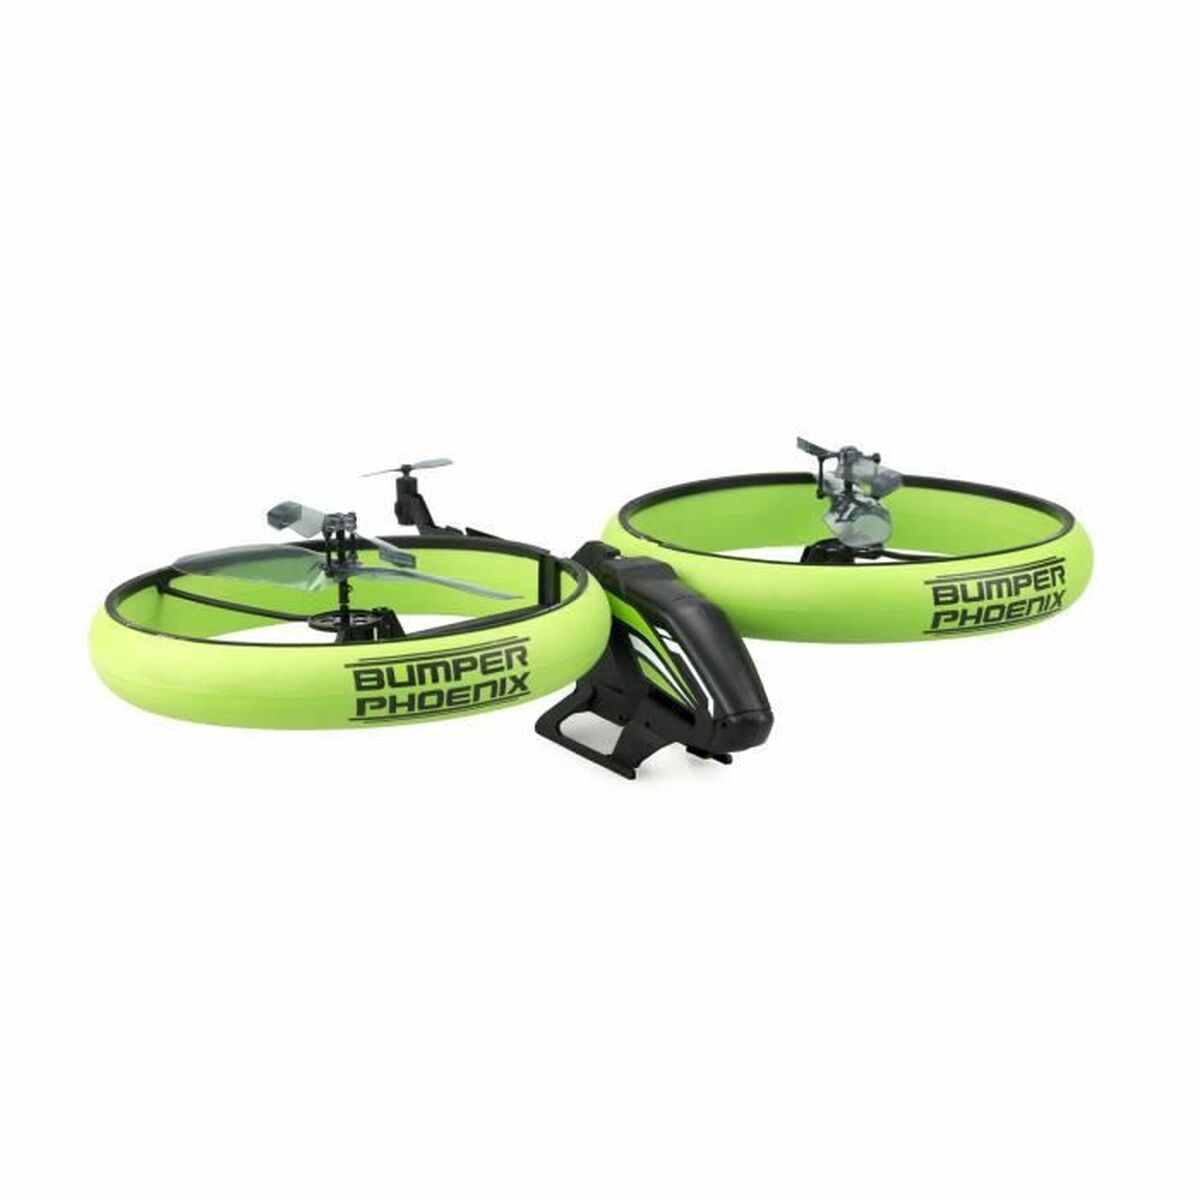 Radio control Helicopter Flybotic SL84814